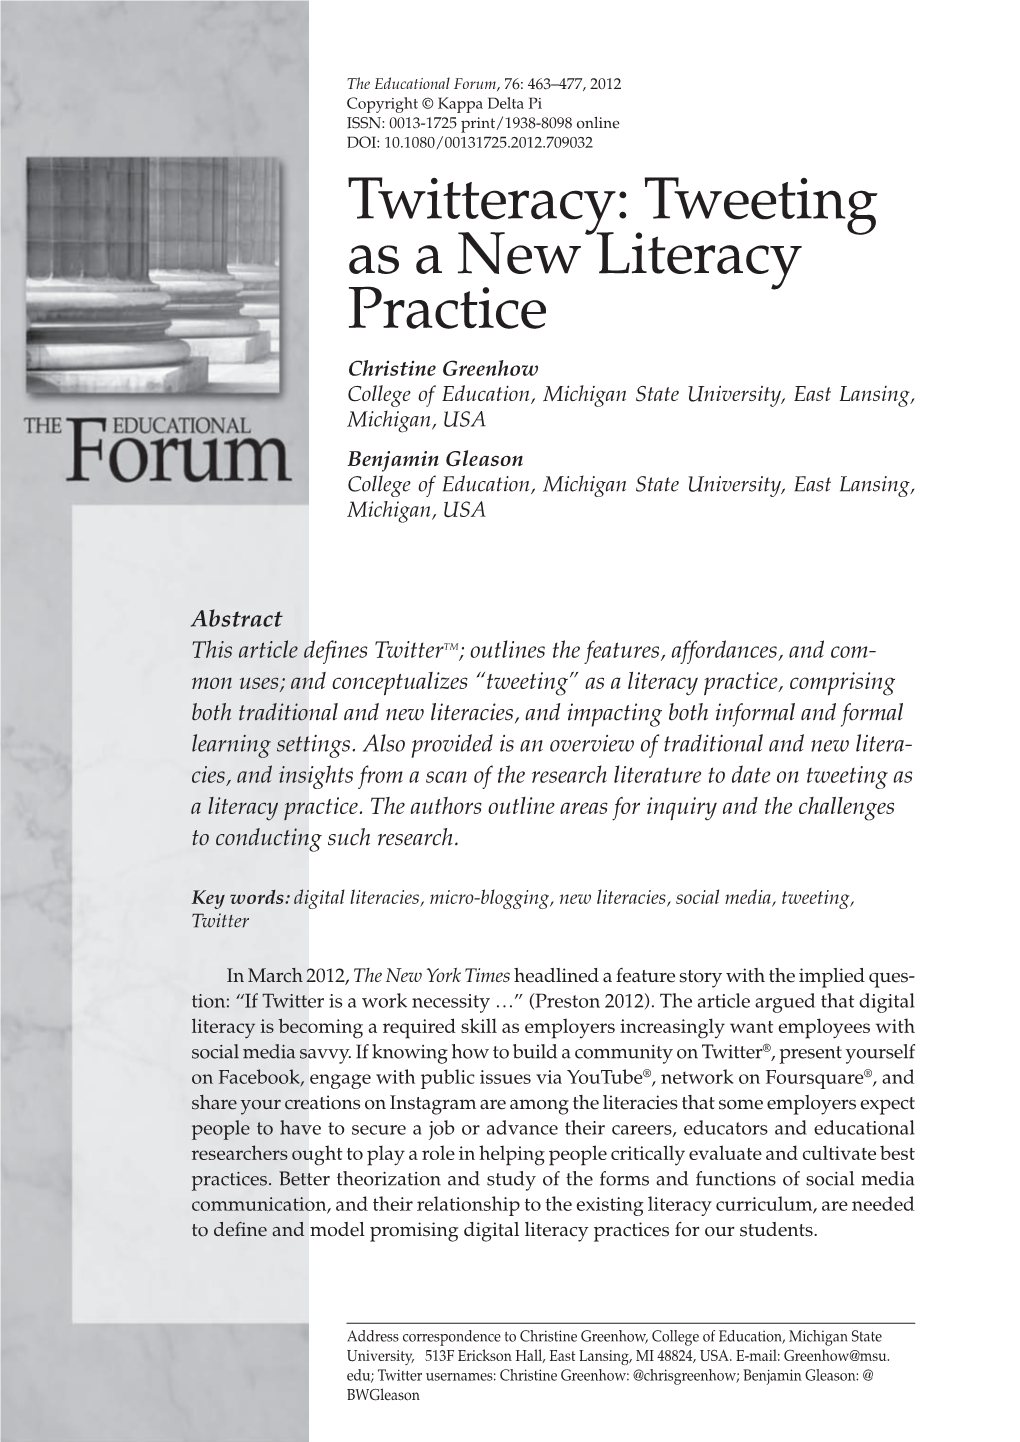 Twitteracy: Tweeting As a New Literacy Practice